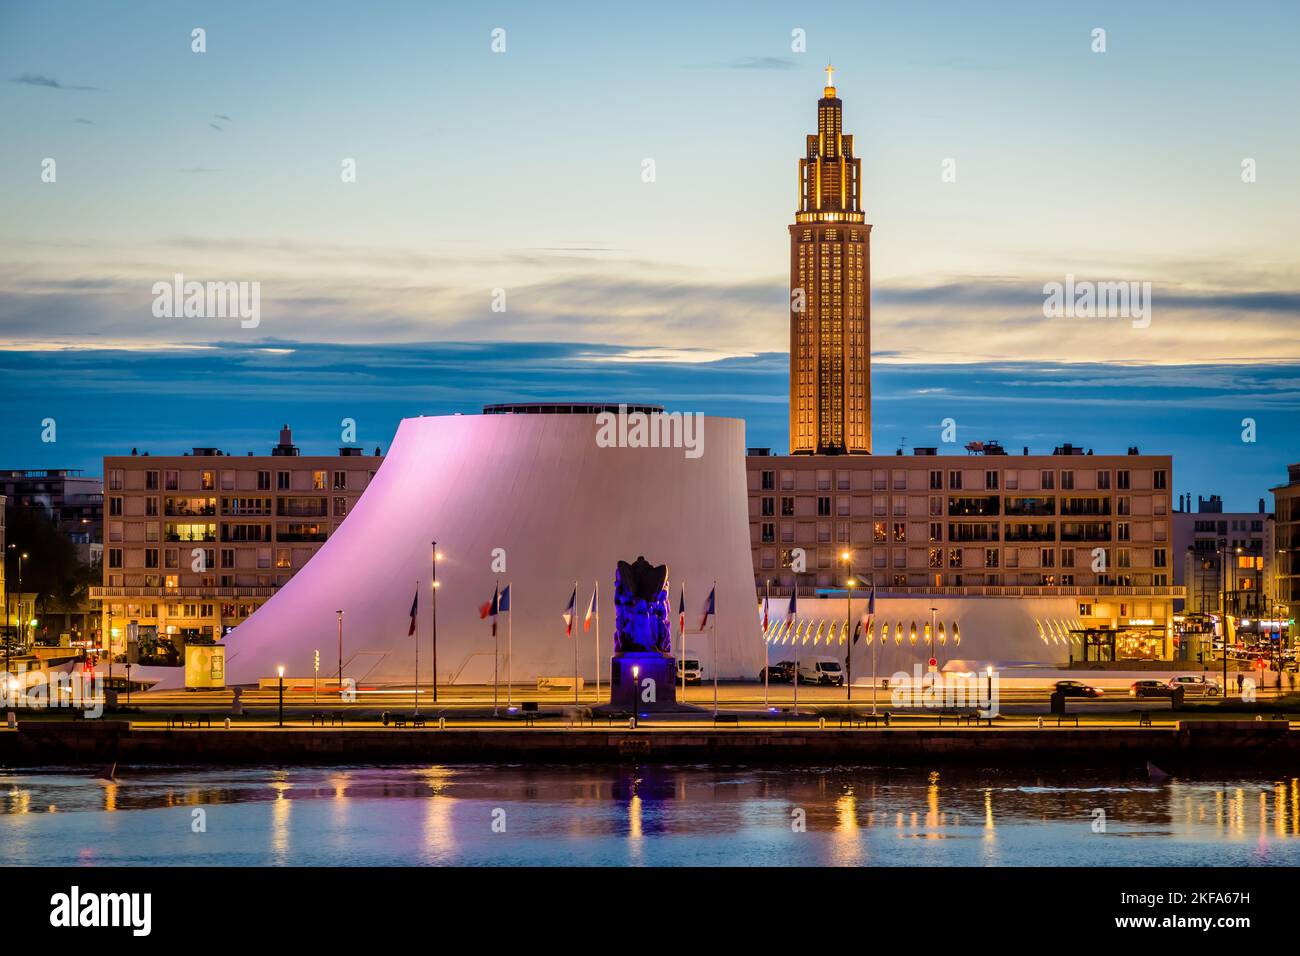 The Volcan cultural center, the Oscar Niemeyer public library and the bell tower of St. Joseph's Church in Le Havre, France, at nightfall. Stock Photo